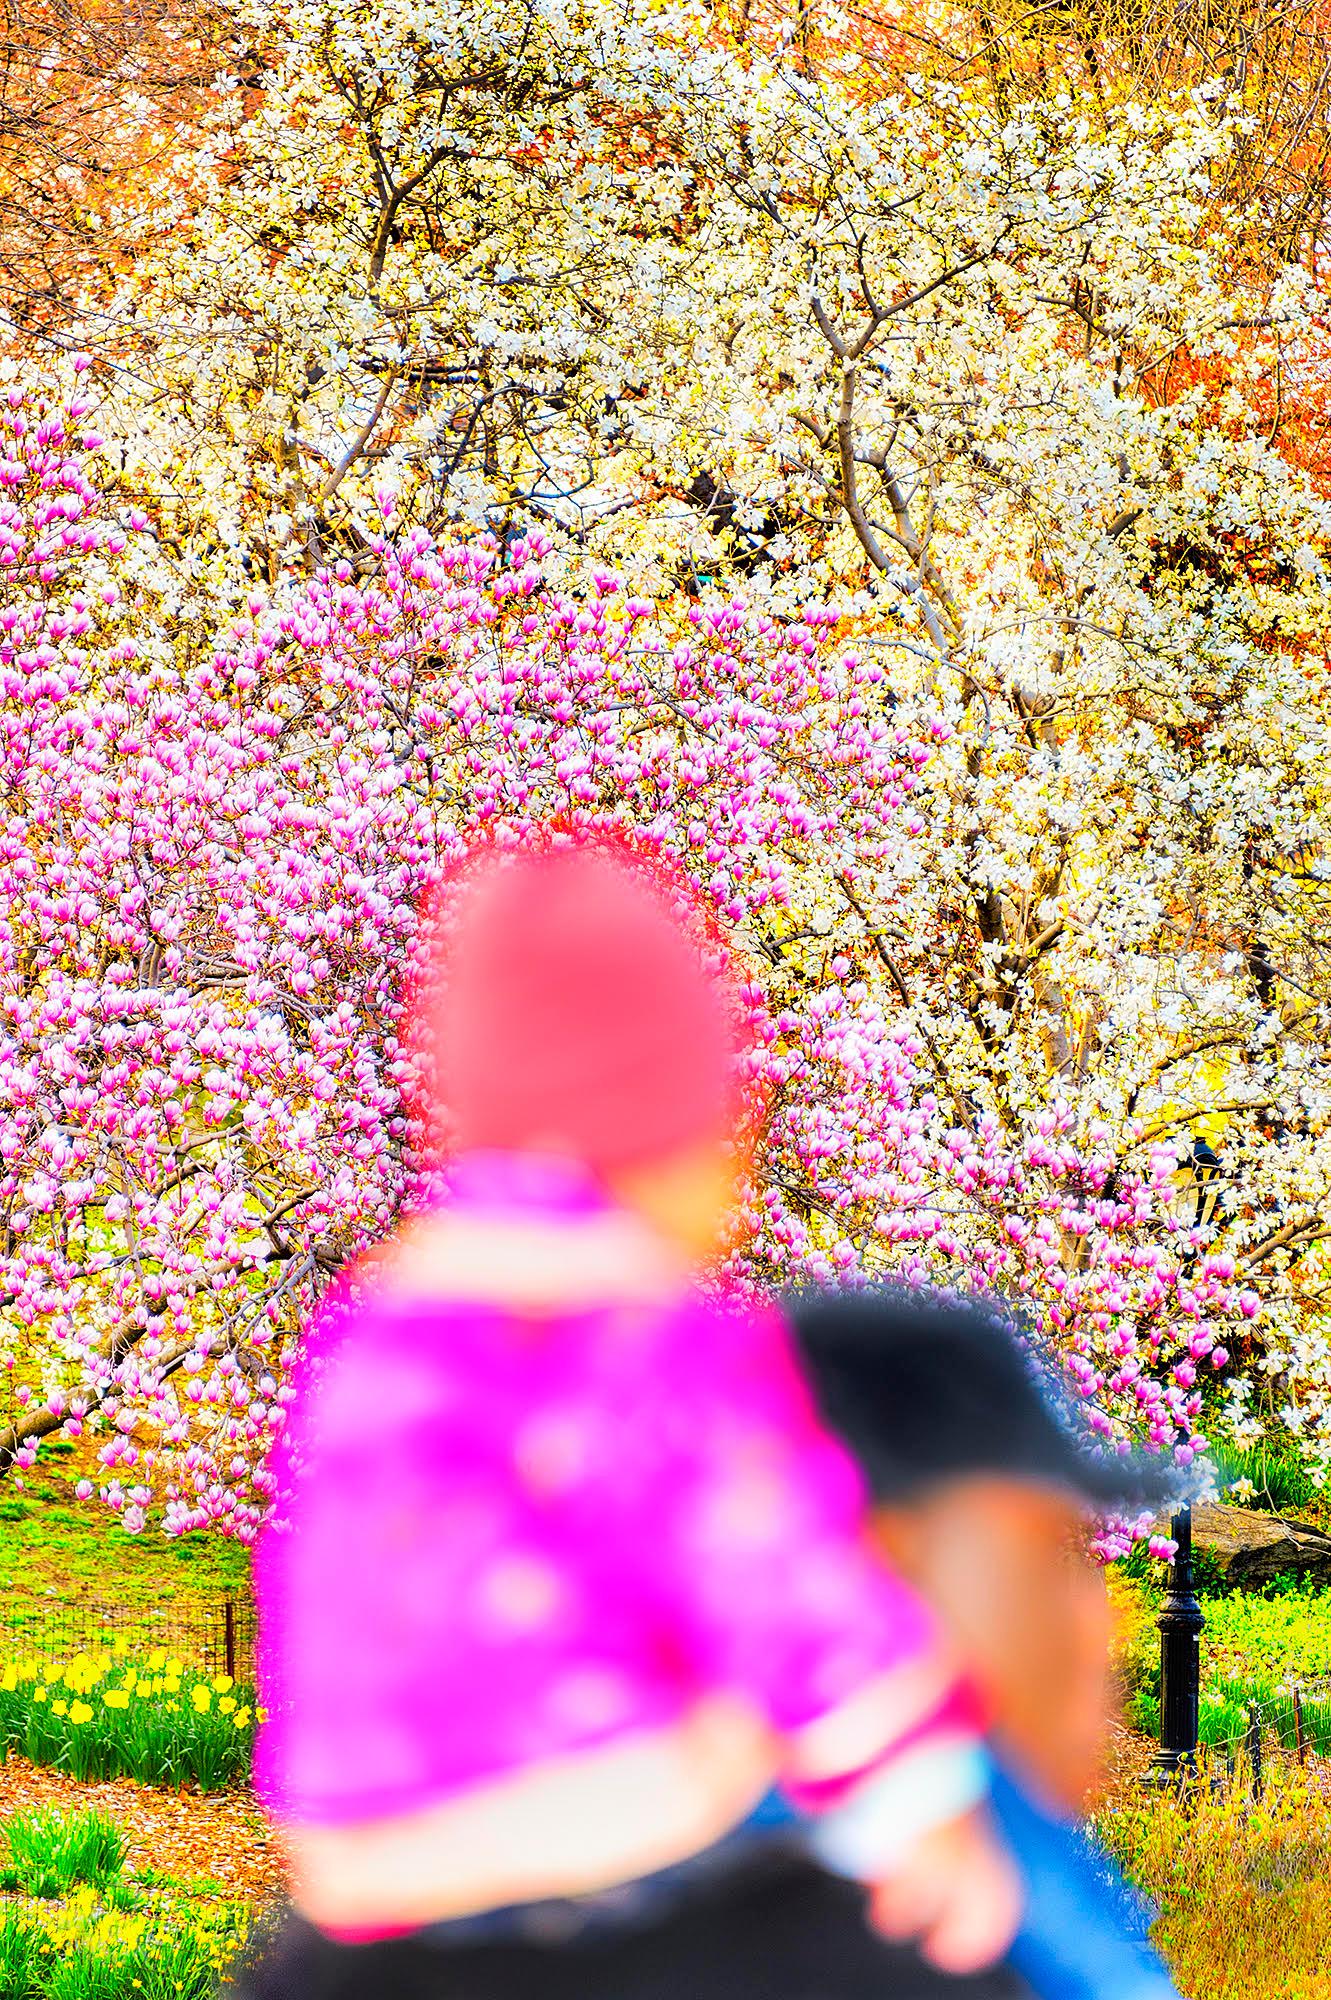 Mitchell Funk Abstract Photograph - Child in Pink on Father's Shoulders Against Cherry Blossoms